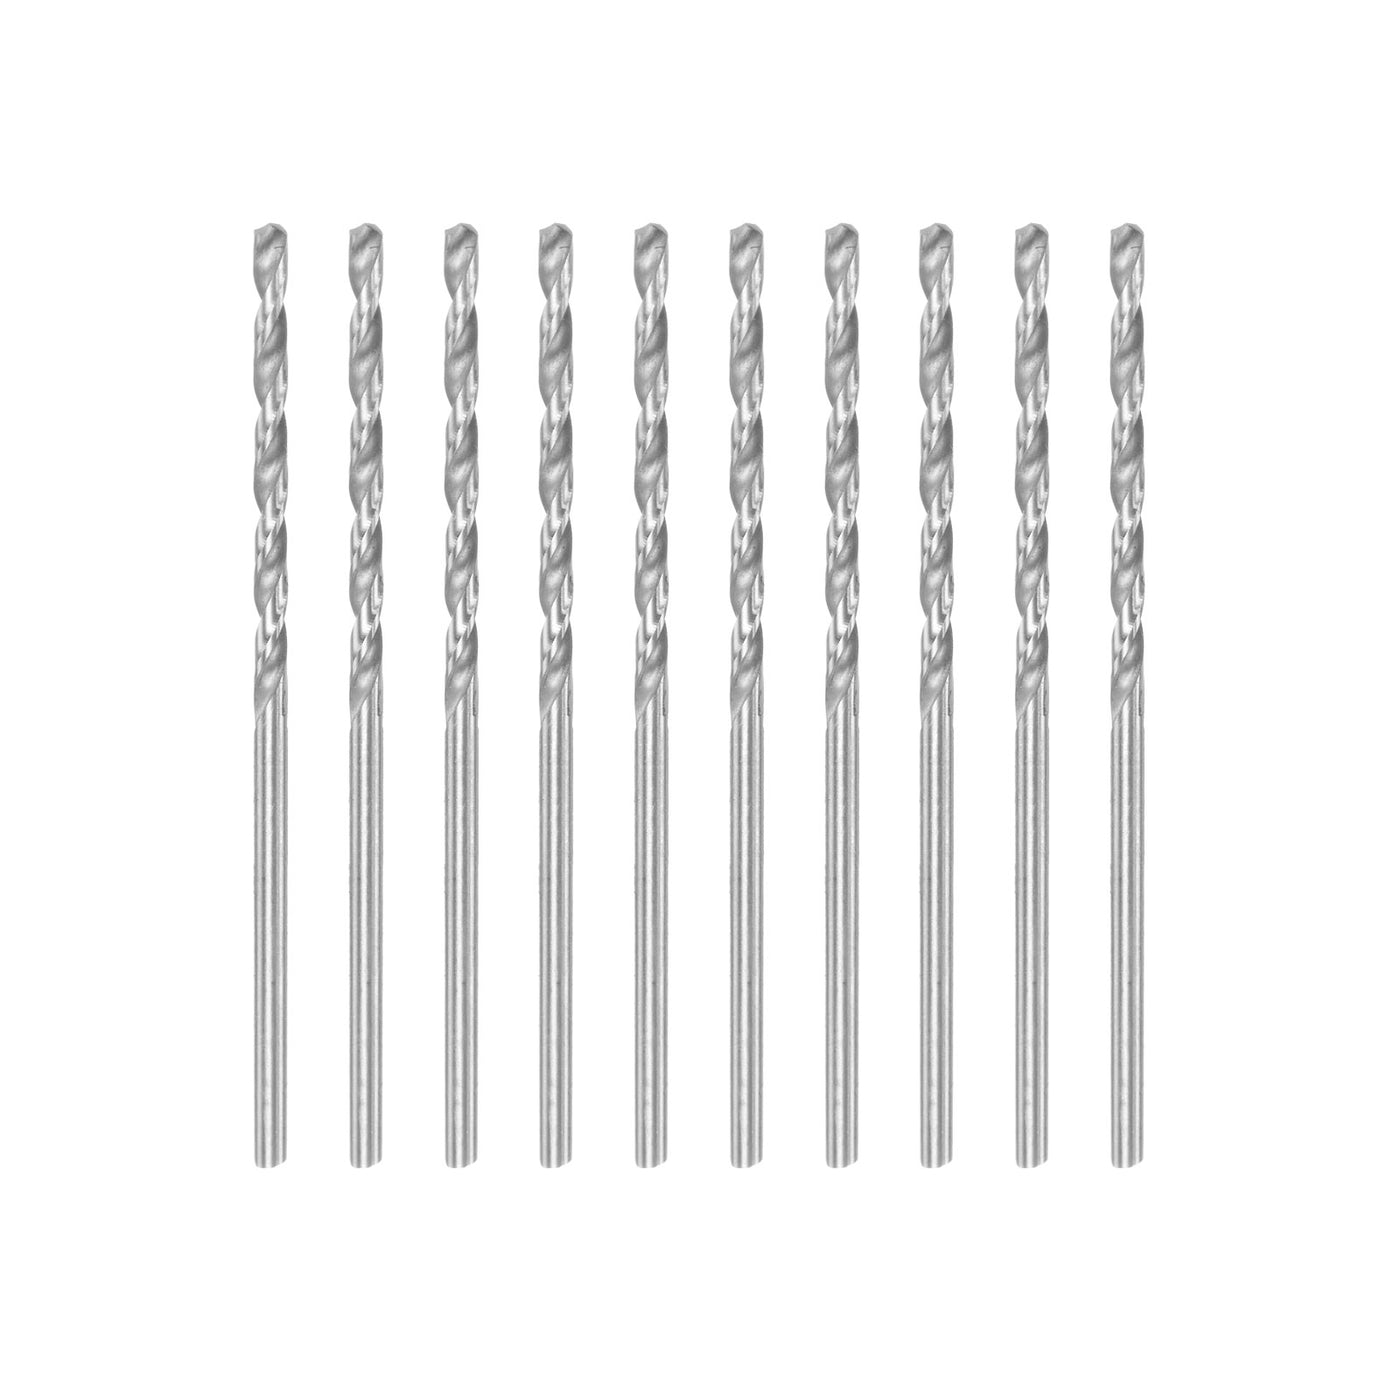 uxcell Uxcell 10 Pcs 1.8mm High Speed Steel Drill Bits, Fully Ground 52mm Length Drill Bit